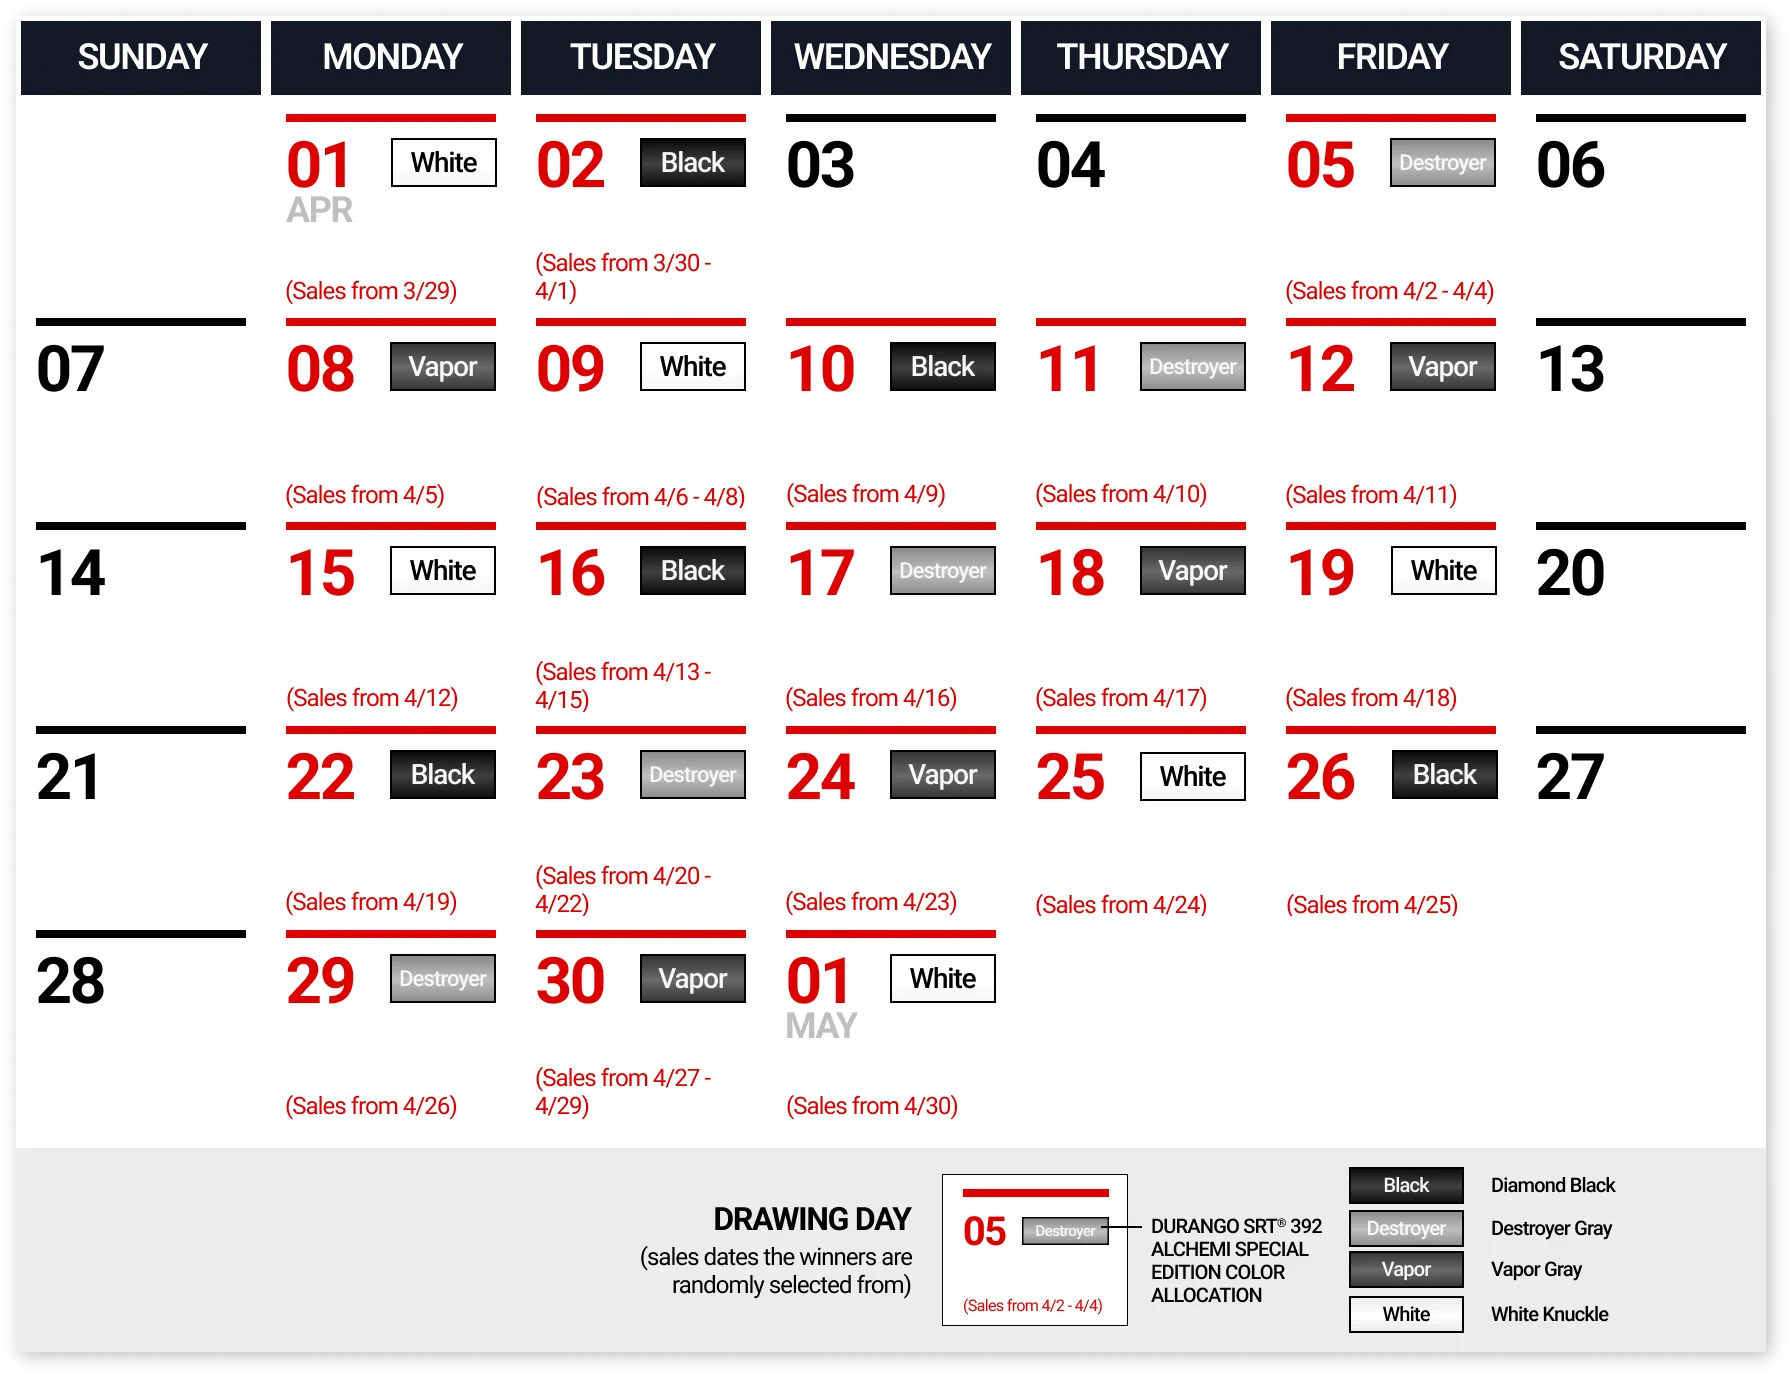 calendar outlining the reporting schedule for the campaign